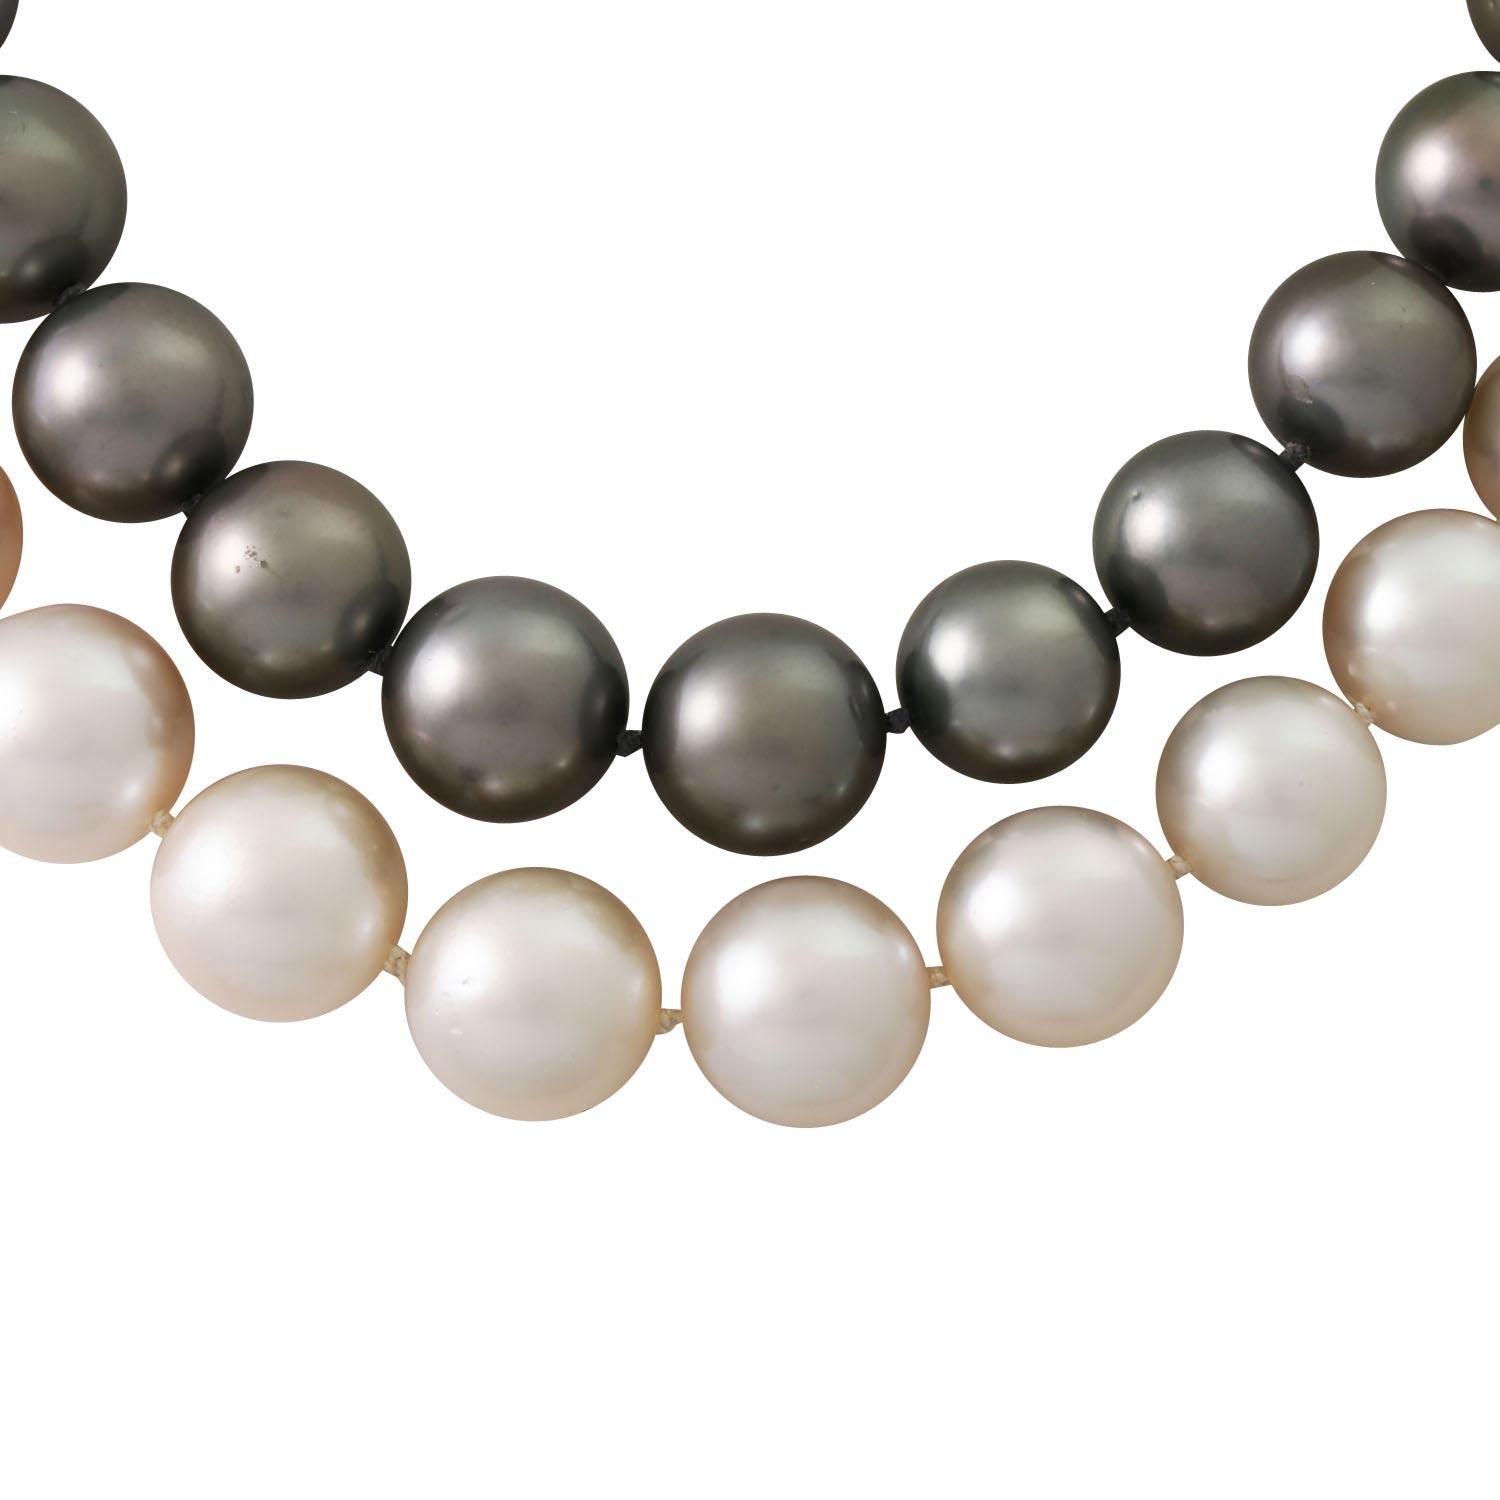 Tahitian and South Sea cultured pearls 11.7 - 15.5 mm, princess and baguette cut diamonds total approx. 3.4 ct, approx. WHITE-GW (H-K)/VVS-SI, clasp WG 14K, 214.1 g, Chain length approx. 43 cm, 21st century, slight signs of wear. Handmade clasp that